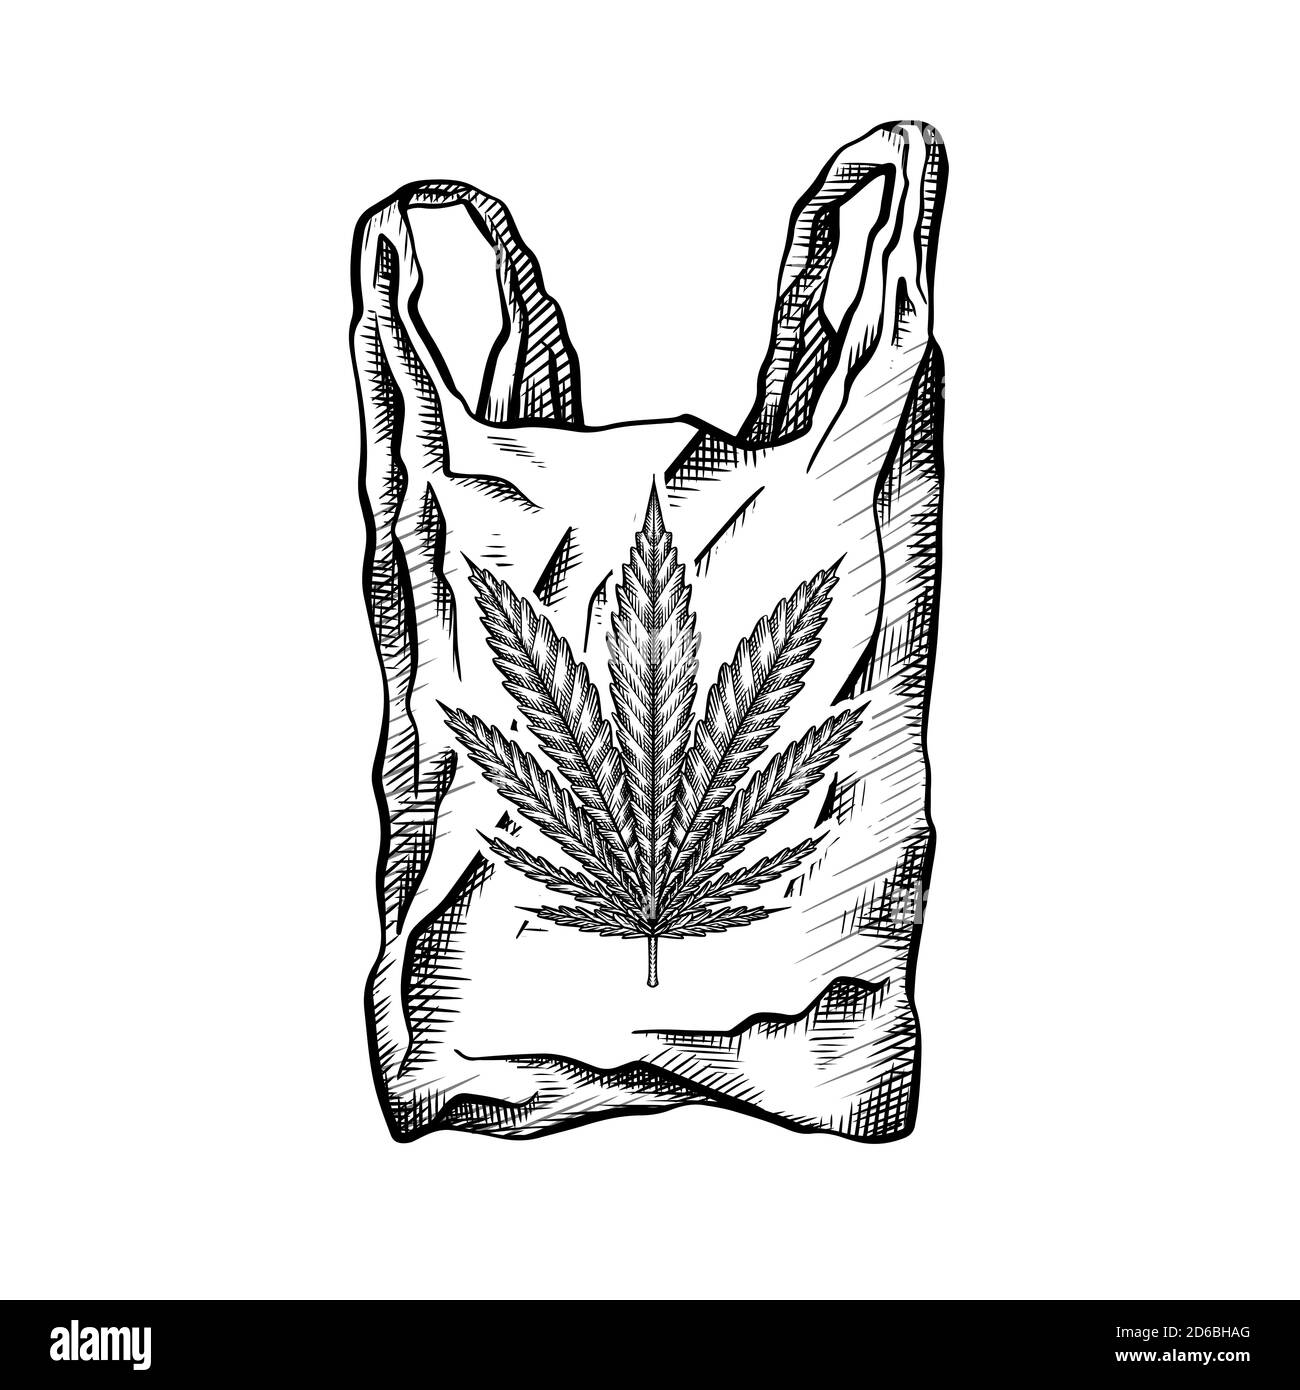 Nature bag with hatching and marijuana leaf. Eco friendly bag zero waste. Recycled waste. Ecological problem. Vector black and white drawing for your Stock Vector